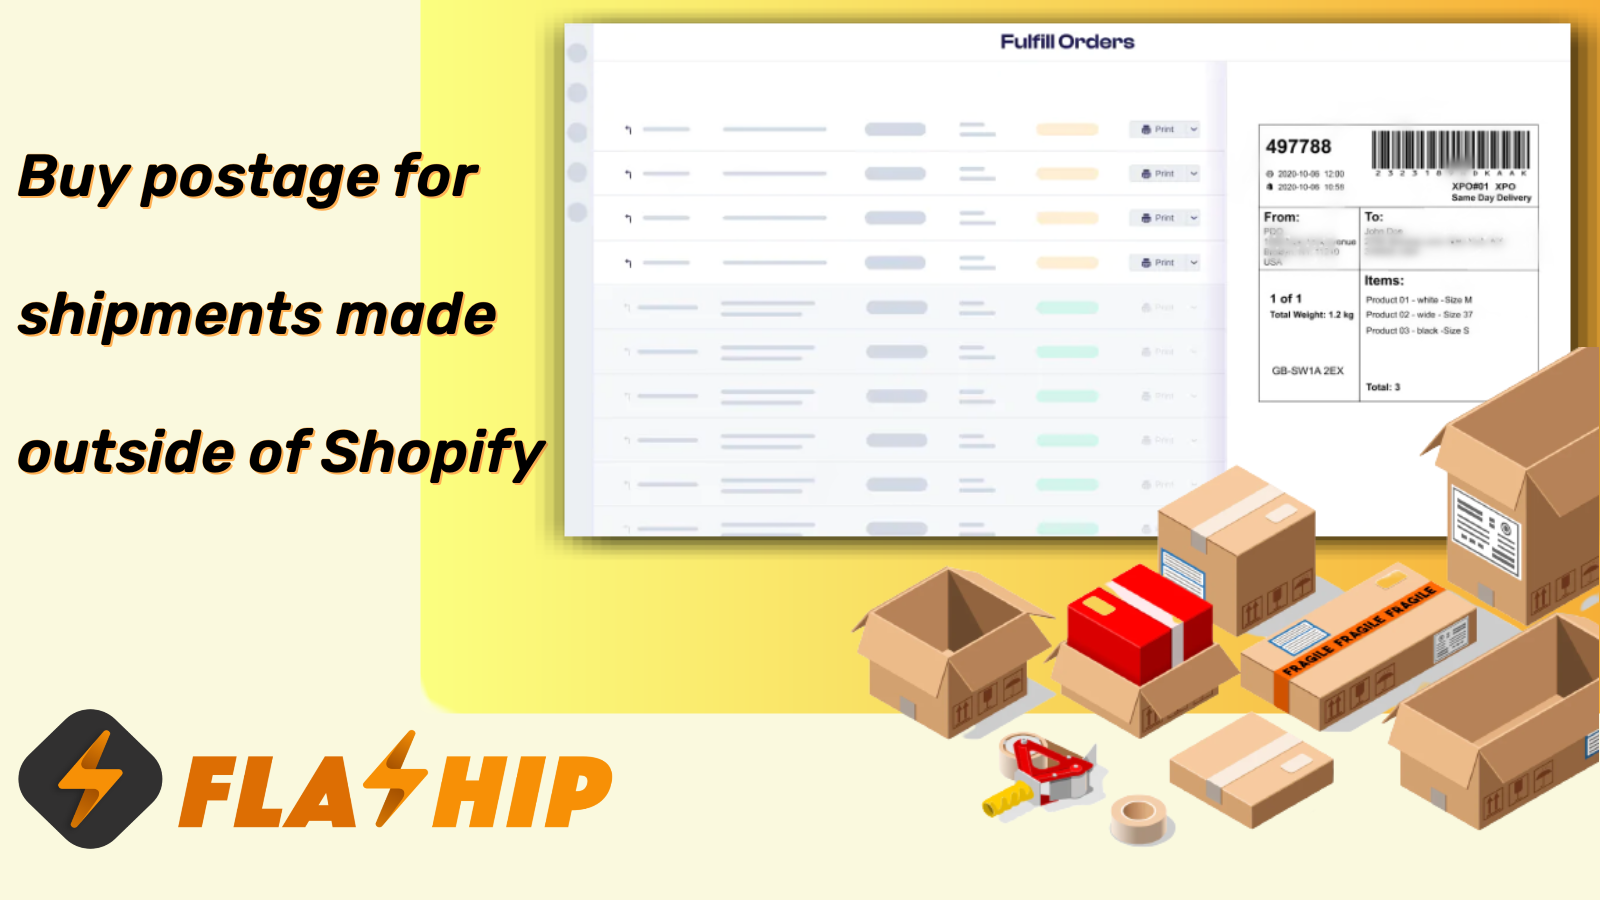 Buy postage for shipments made outside of Shopify.